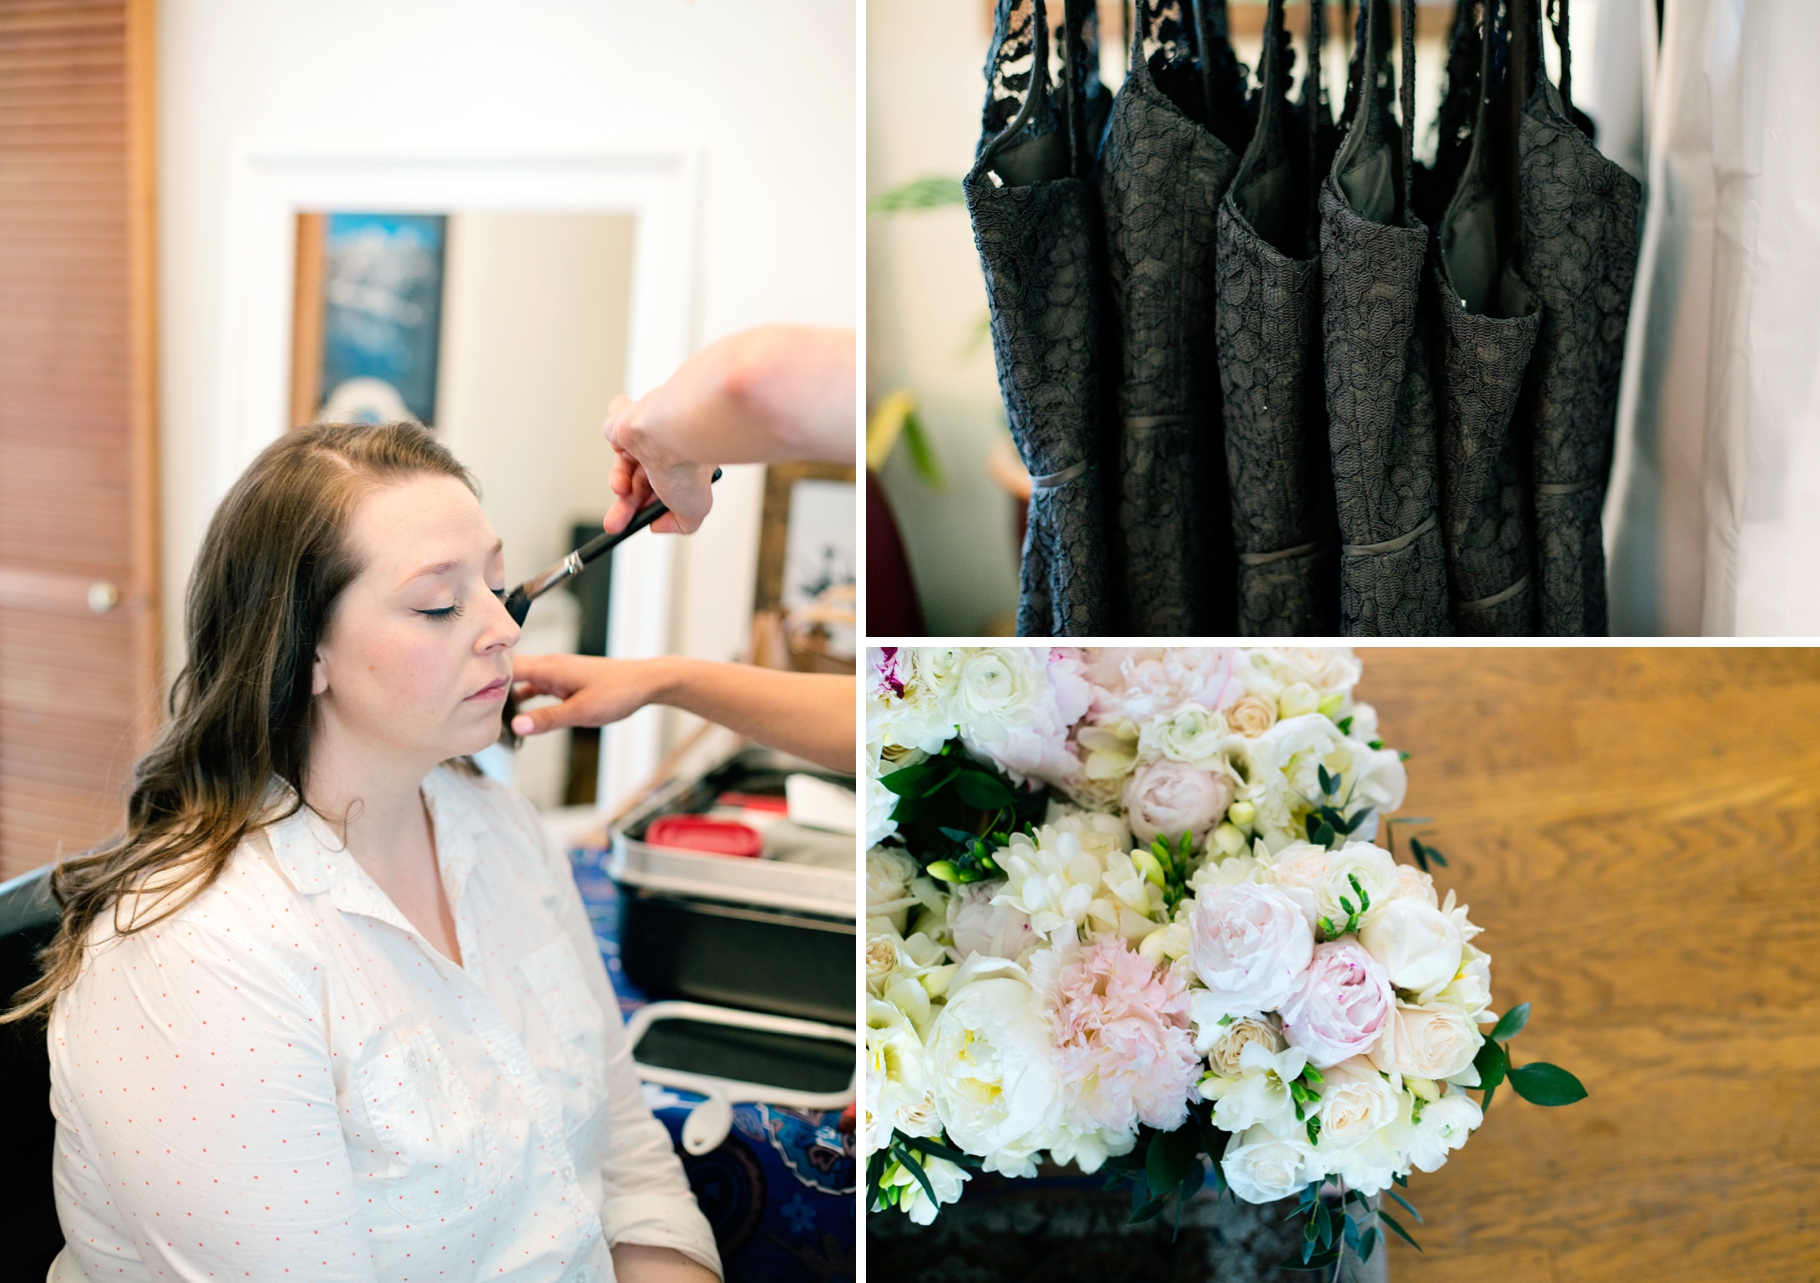 3-Getting-Ready-Bride-Makeup-Bridesmaid-Dresses-Seattle-Wedding-Photographer-Photography-by-Betty-Elaine